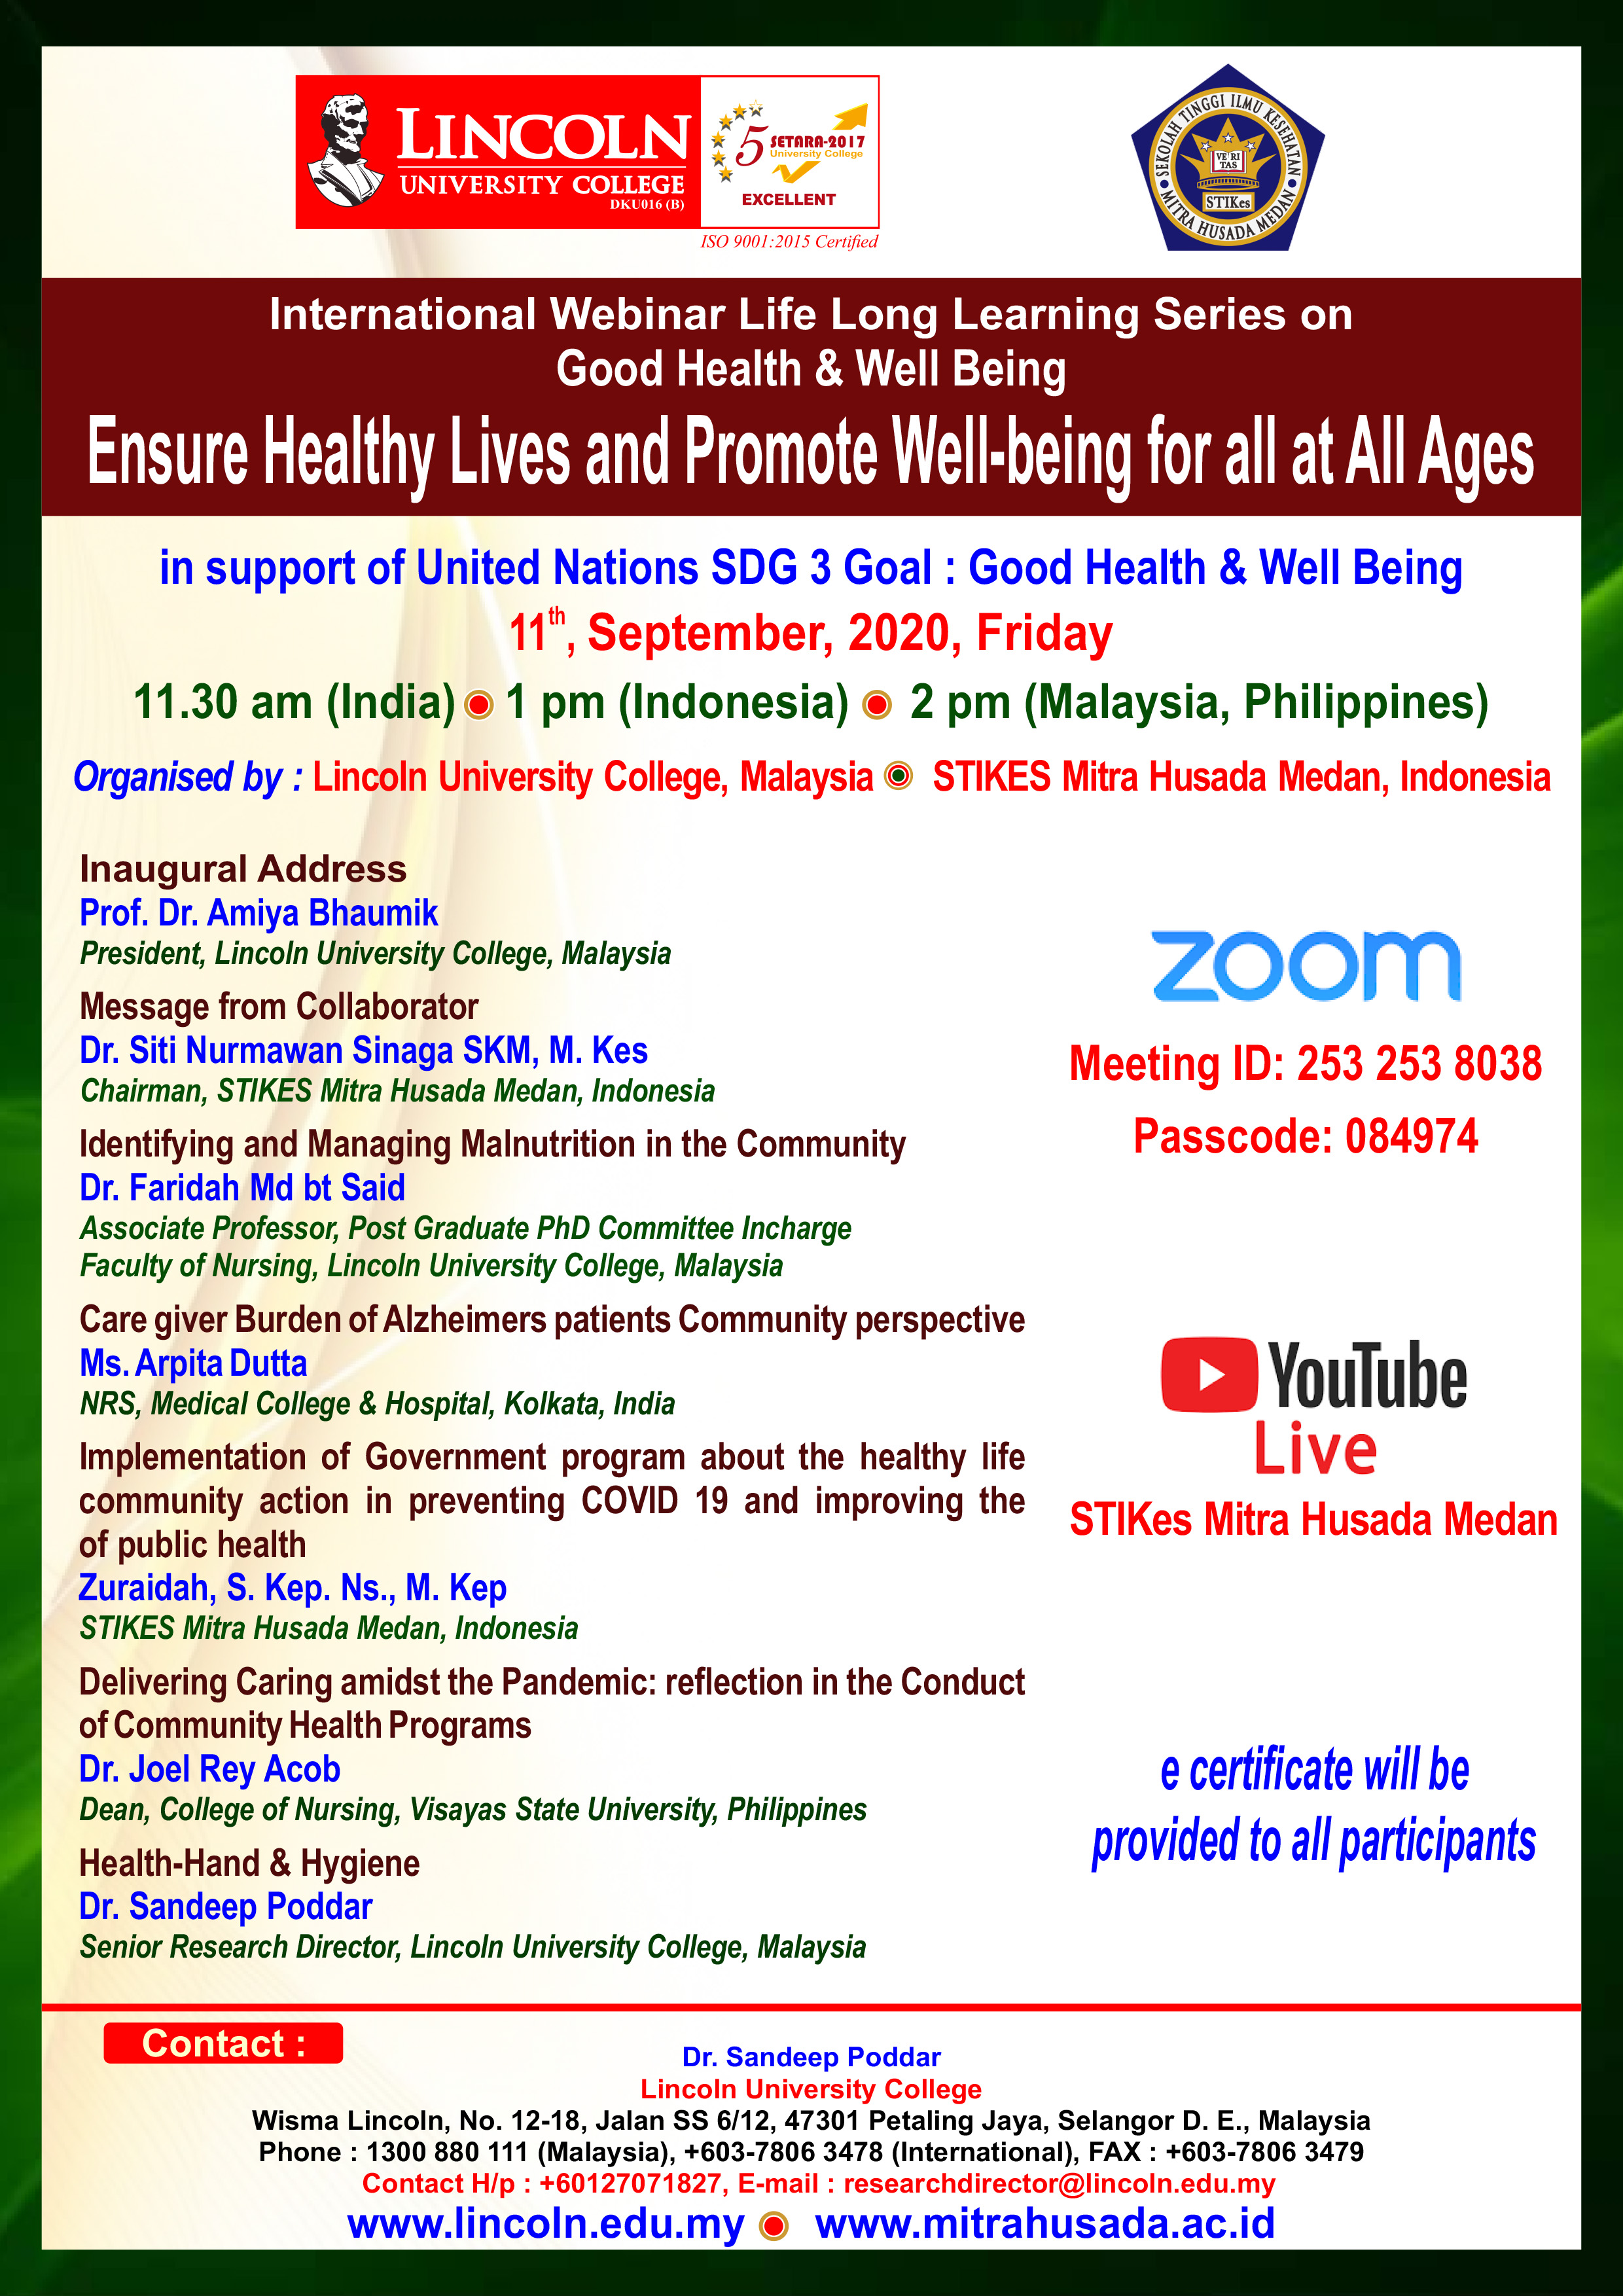 International Webinar Life Long Learning Series on Good Health & Well Being, Ensure Healthy Lives and Promote Well-being for all at All Ages